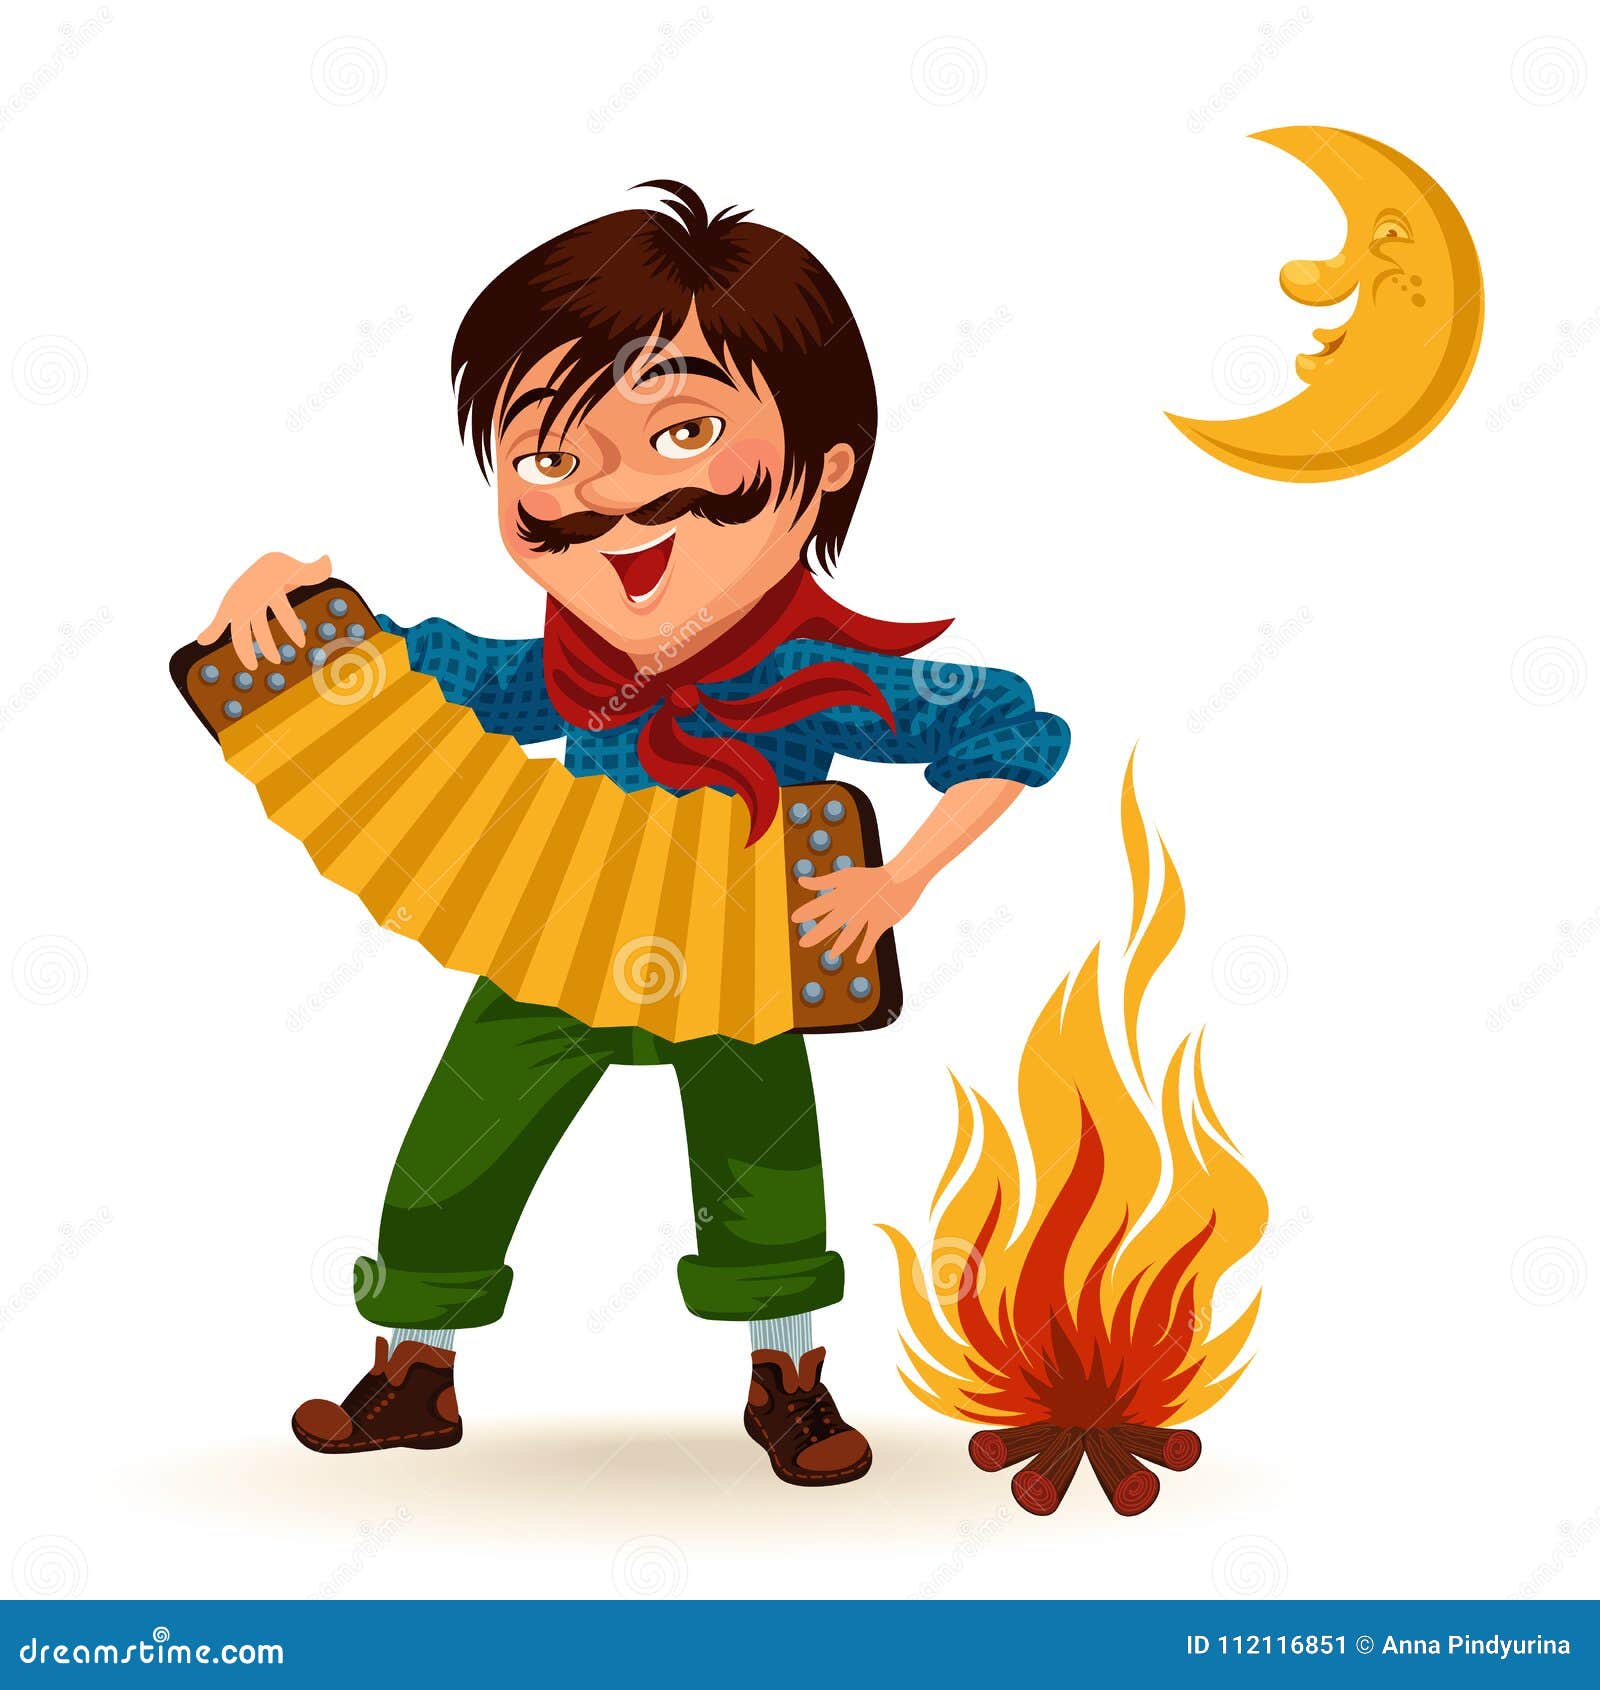 man with mustache plays sanfona near fire under moon  , boy holding accordion at bonfire at night